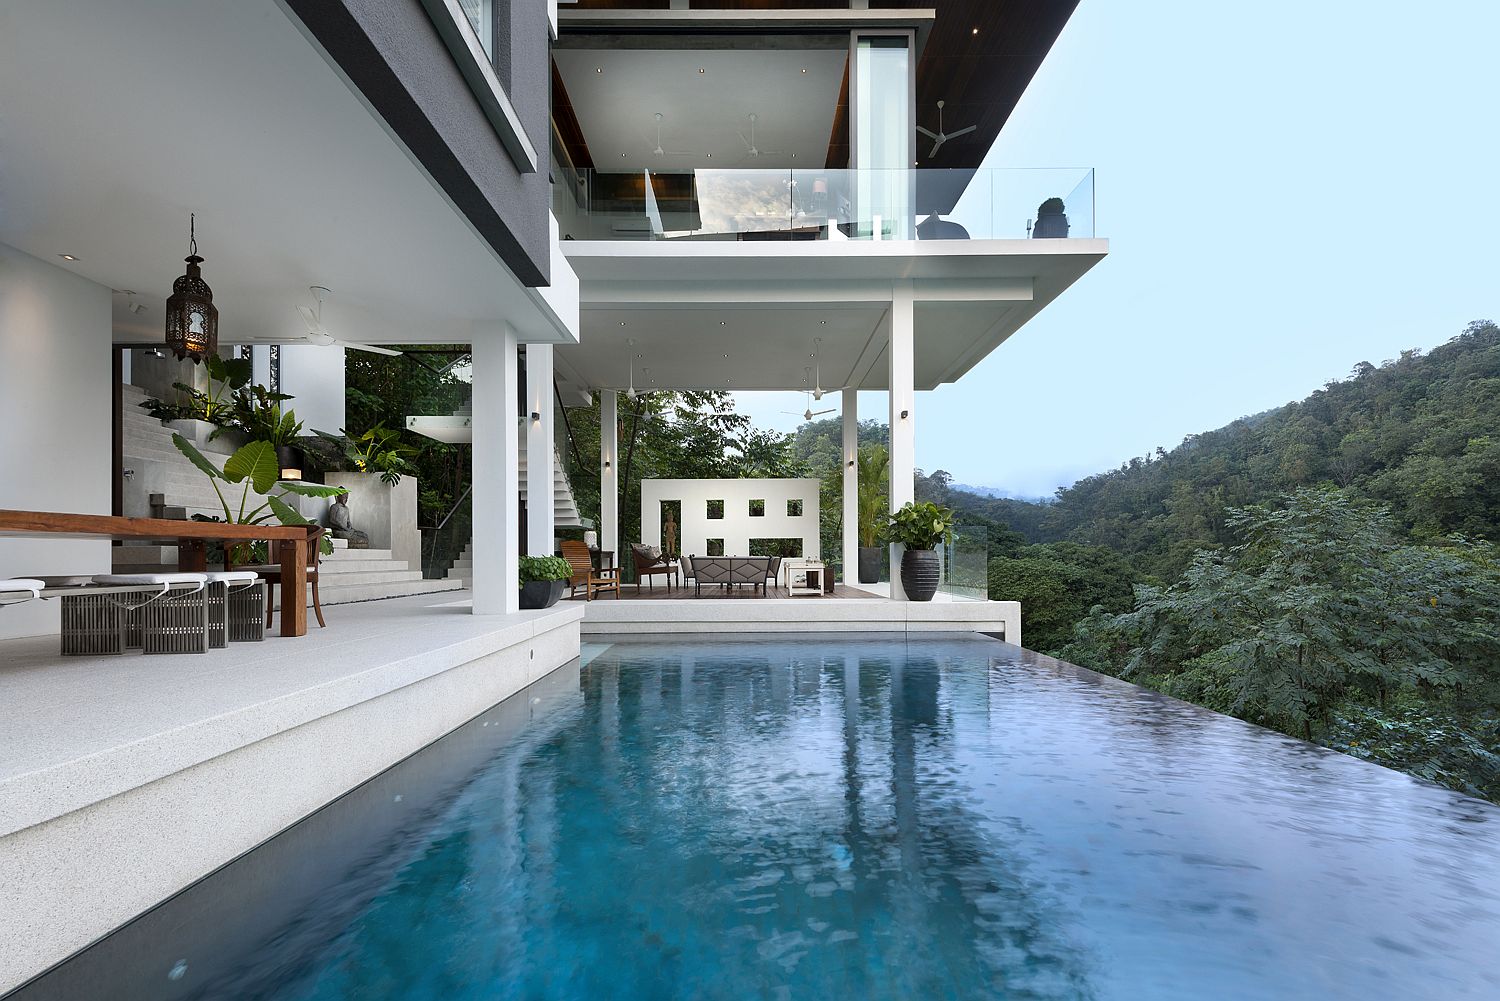 Asian style pool area with forest views is a showstopper